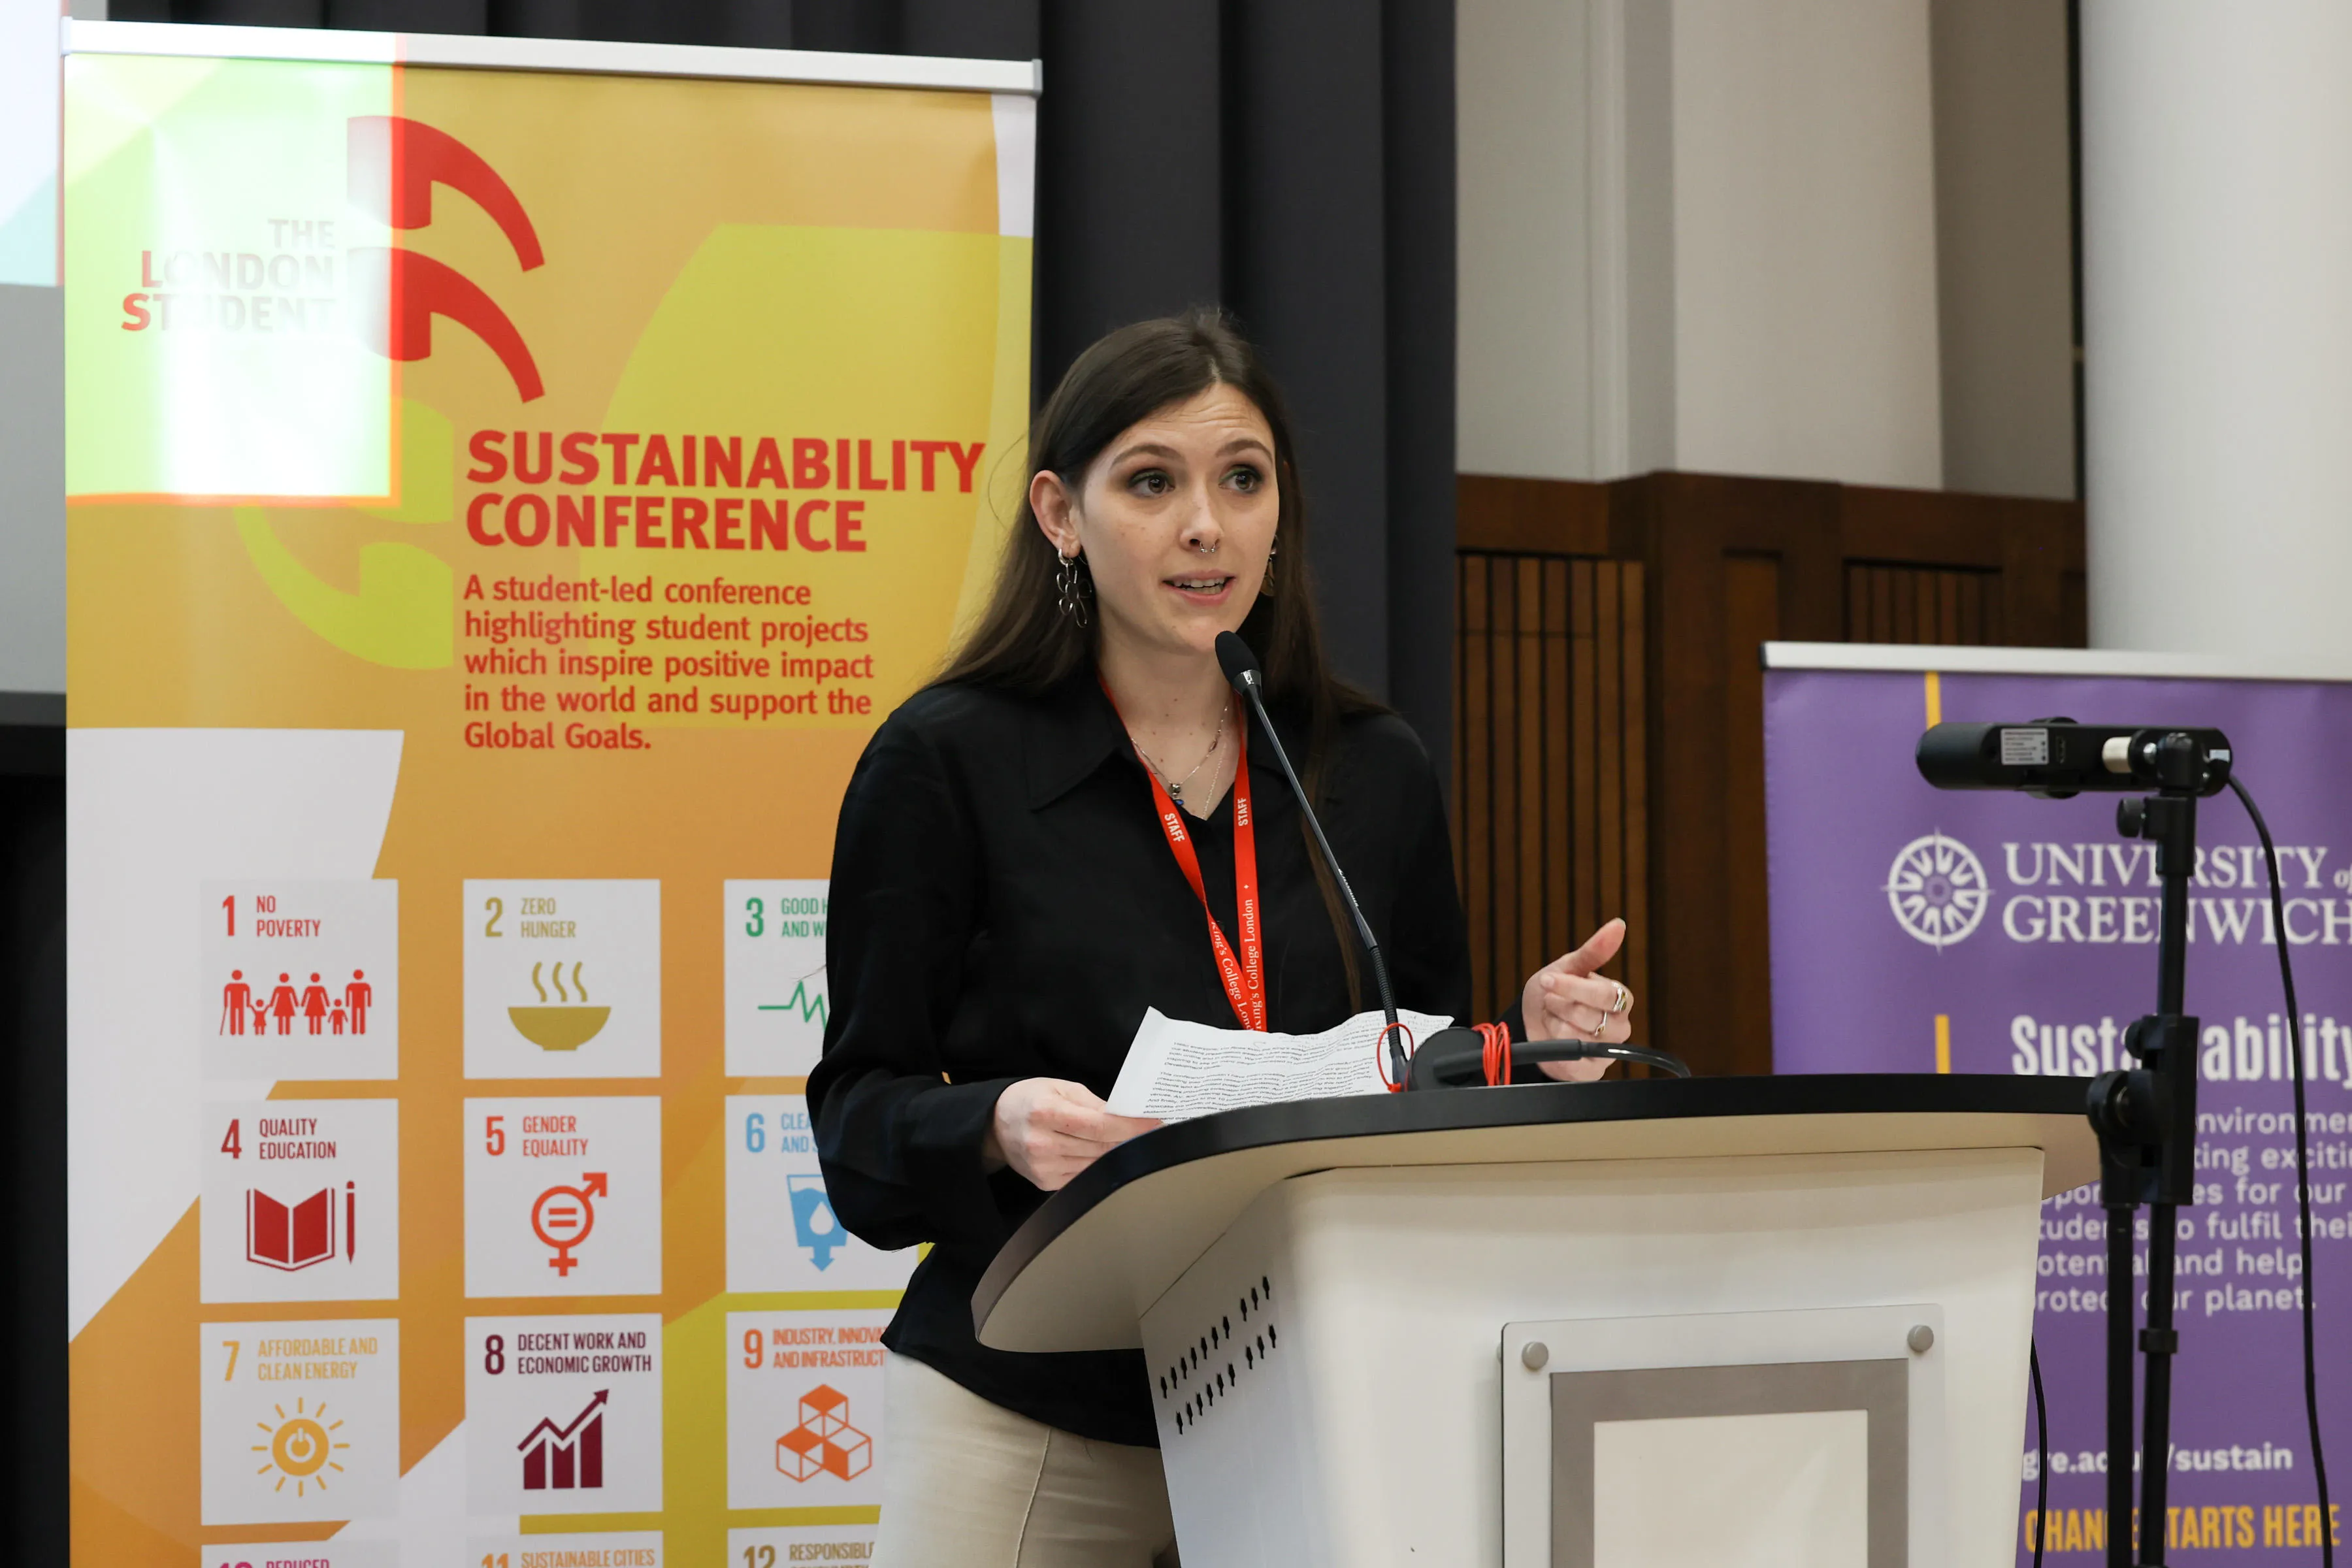 Closing remarks by Rosa Roe Garcia, Sustainability Project Assistant and LSSC23 Steering Group representative for King’s.